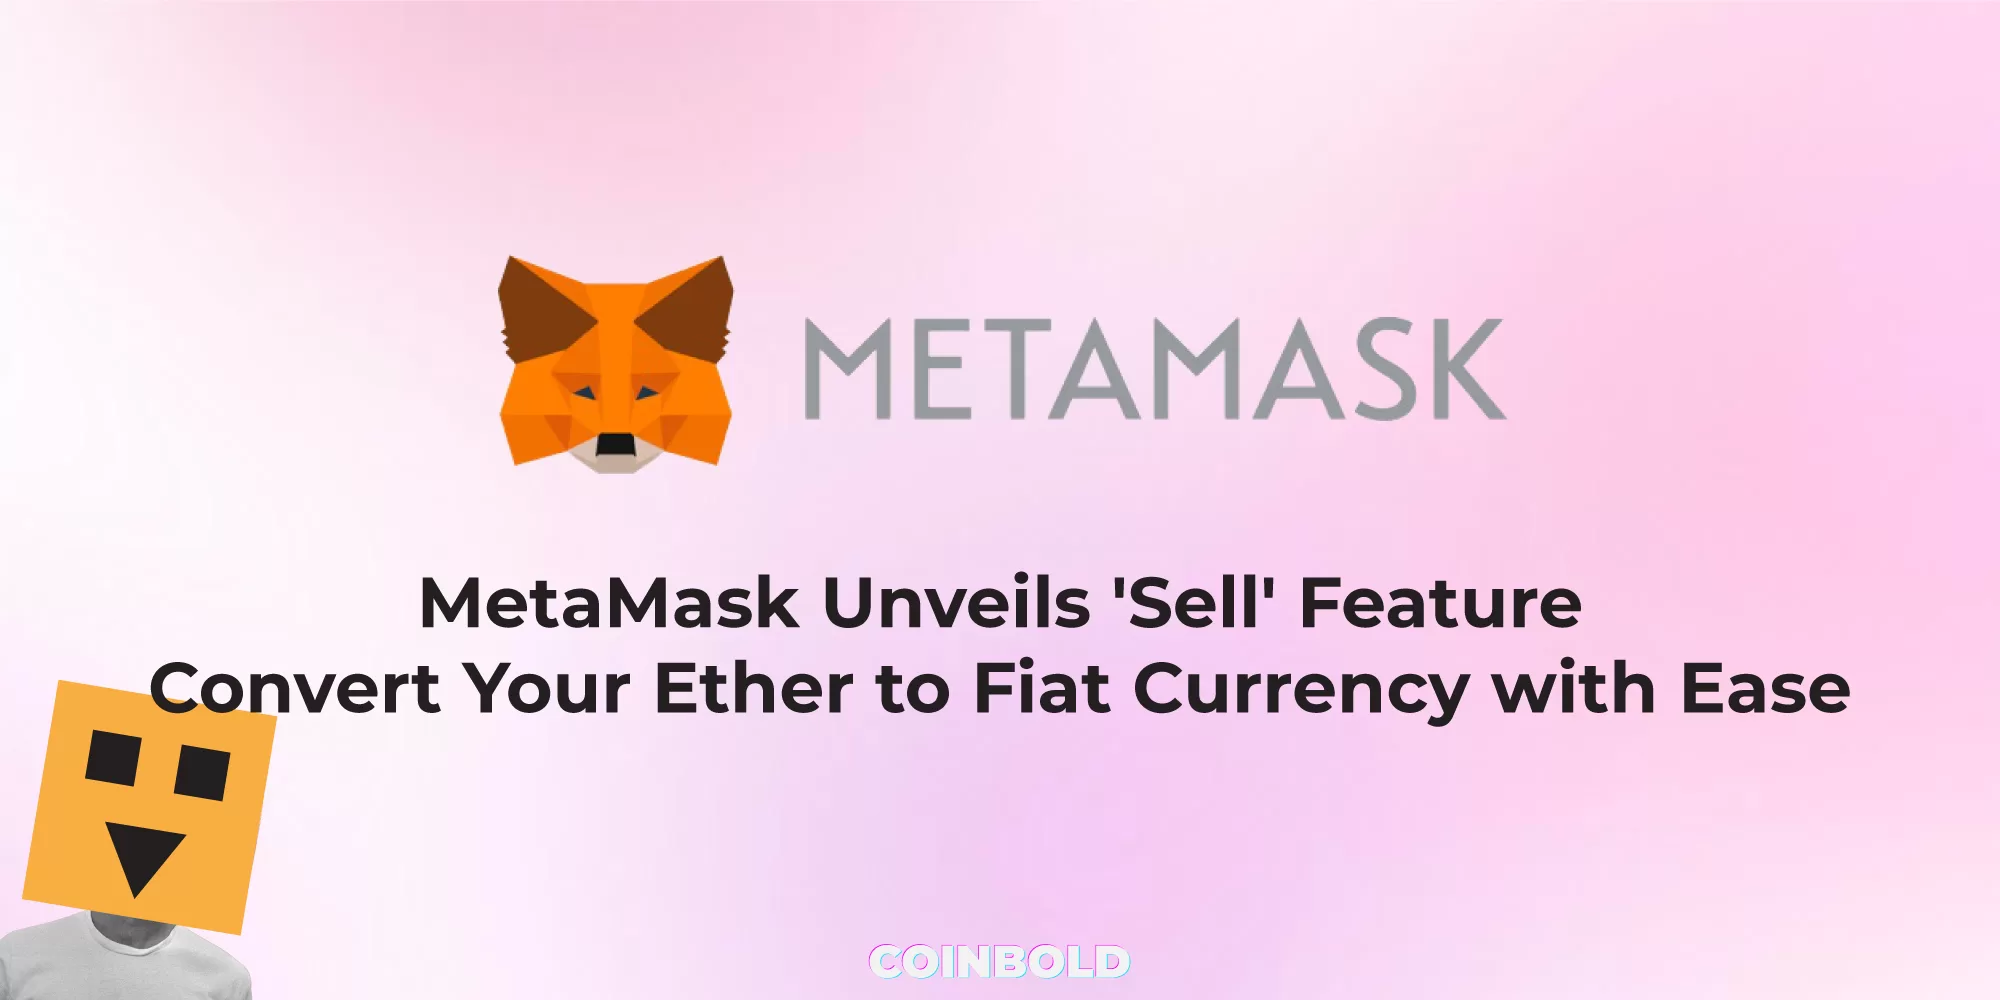 MetaMask Unveils 'Sell' Feature Convert Your Ether to Fiat Currency with Ease